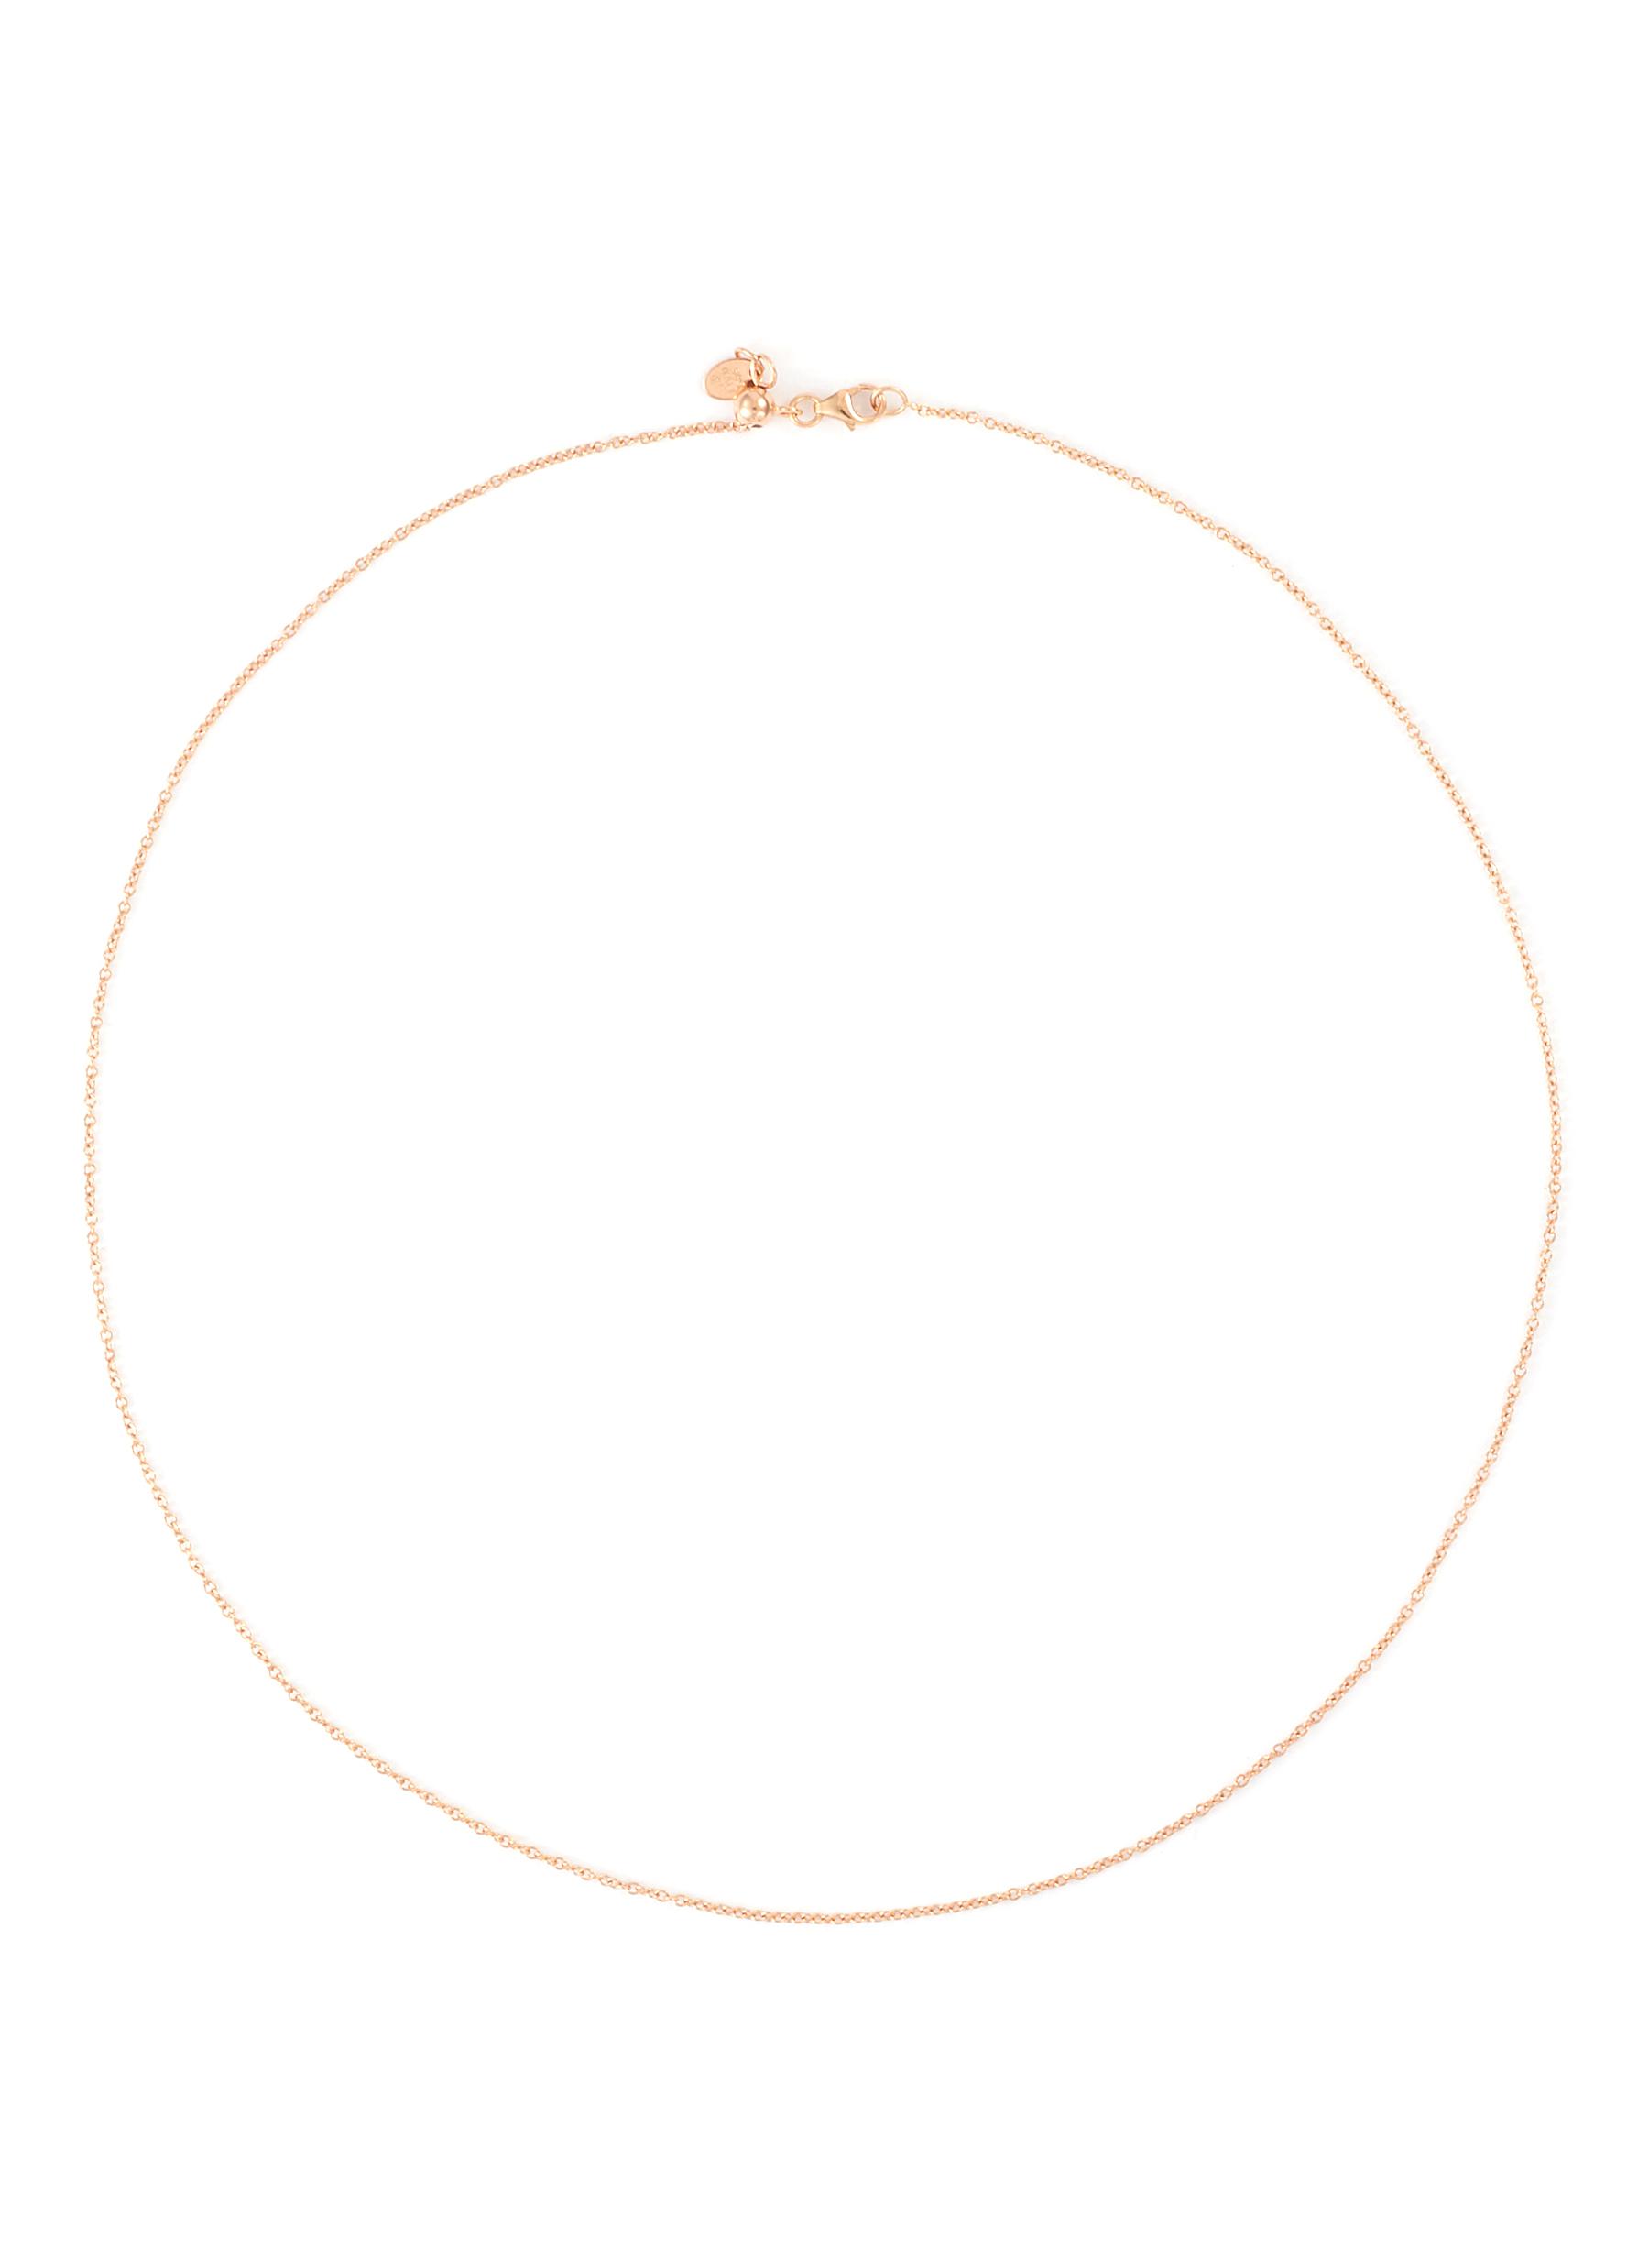 Loquet London Classic 14k Rose Gold Chain Necklace